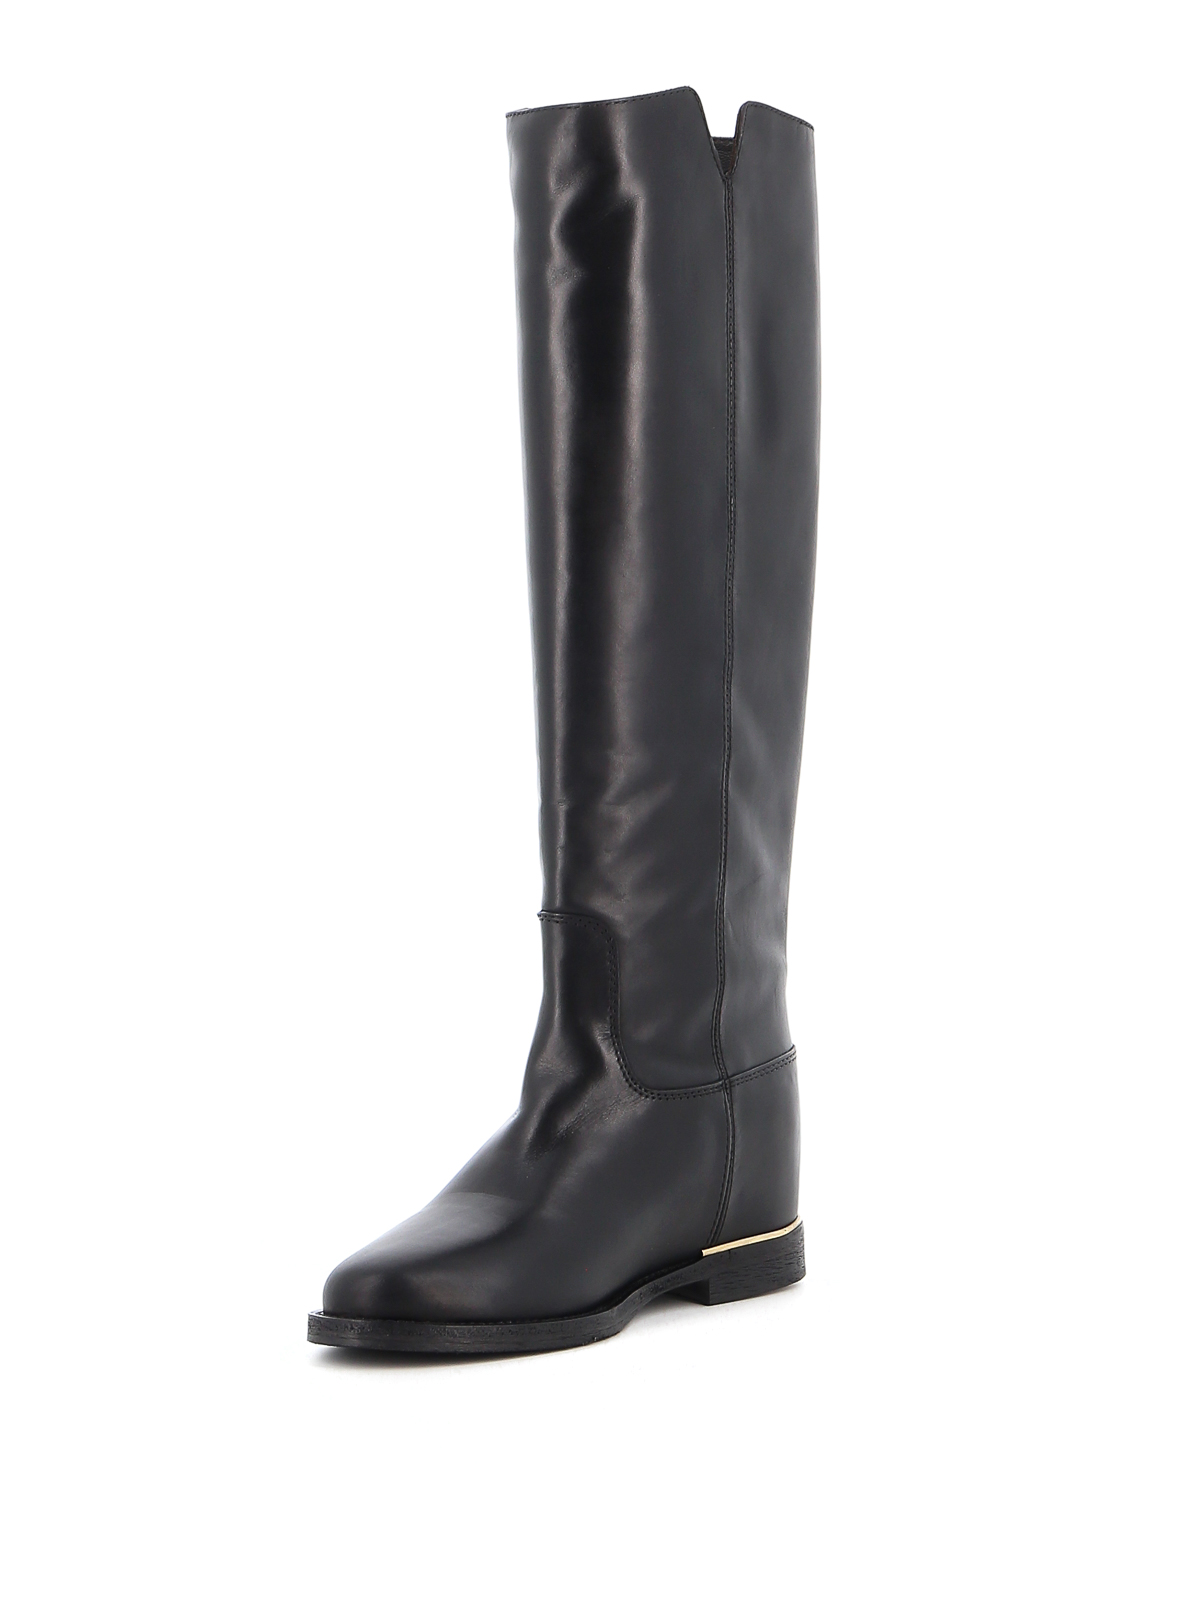 Bron Patois bovenste Boots Via Roma 15 - Leather boots - 3604NERO | Shop online at iKRIX